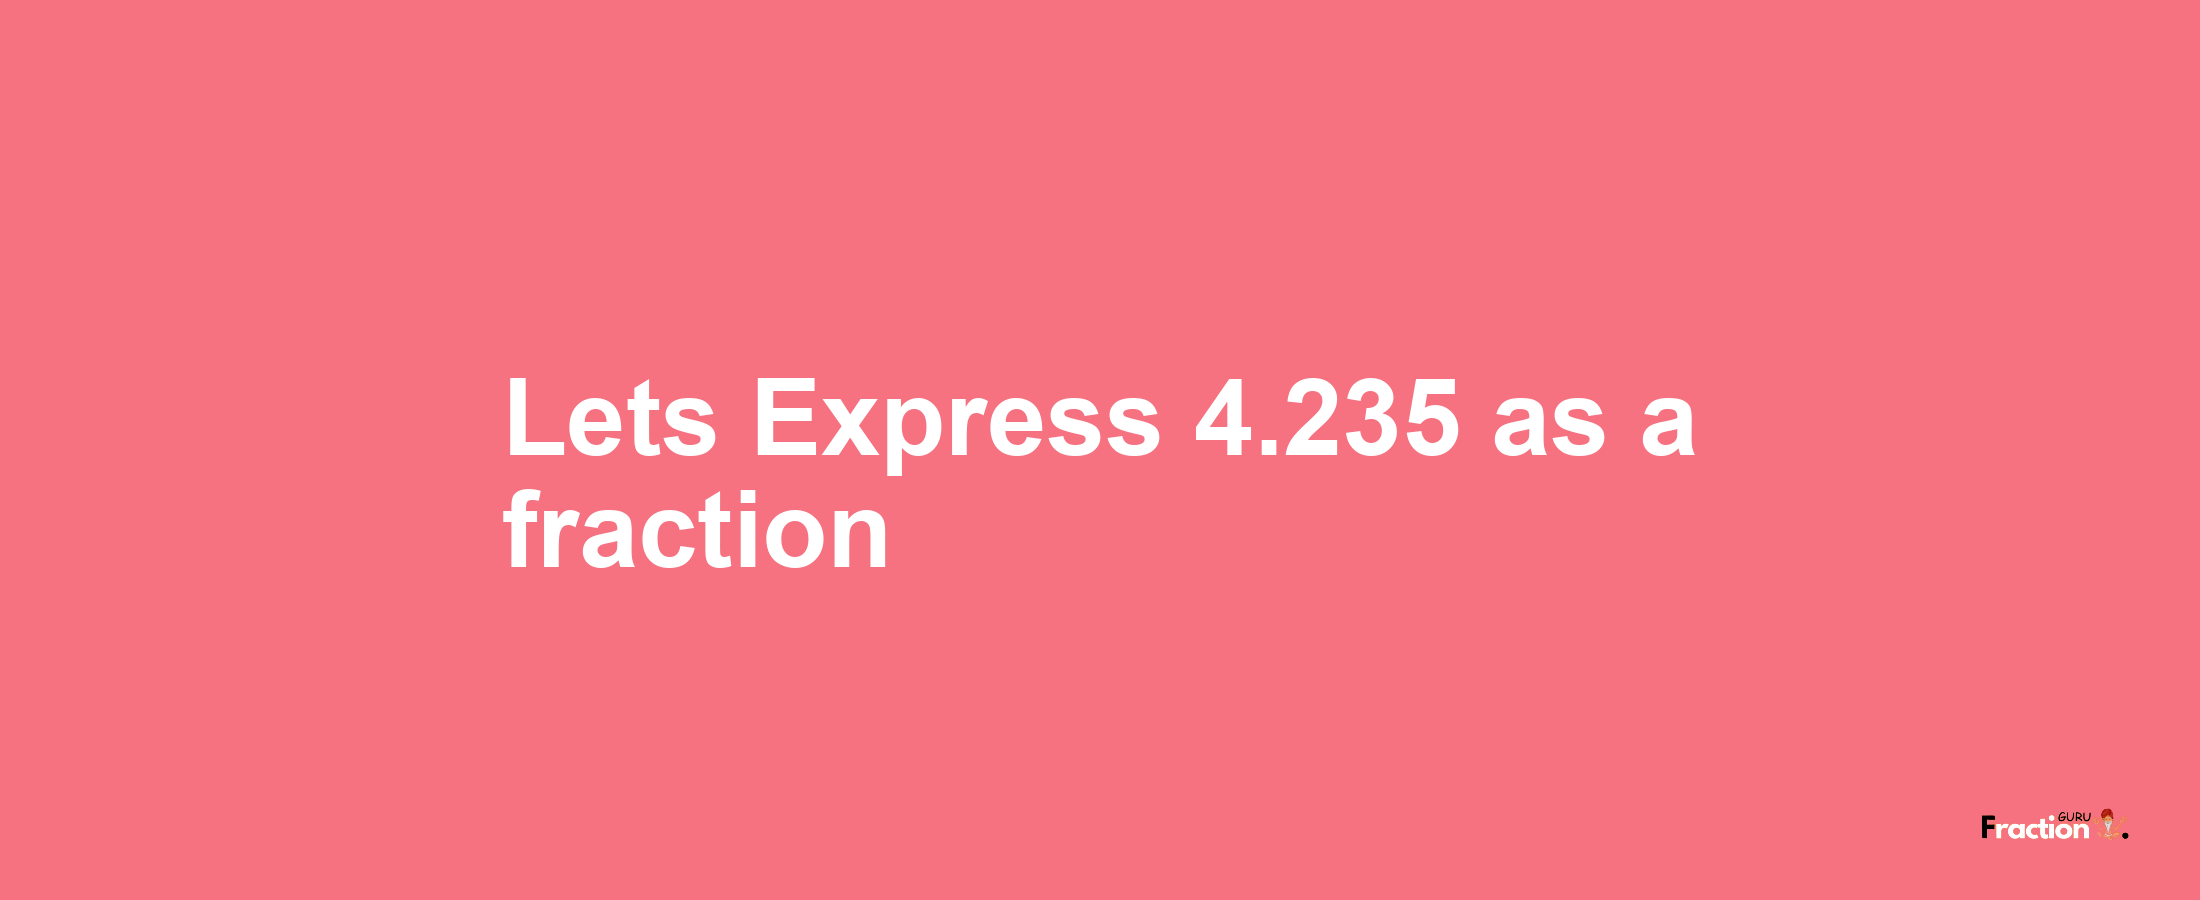 Lets Express 4.235 as afraction